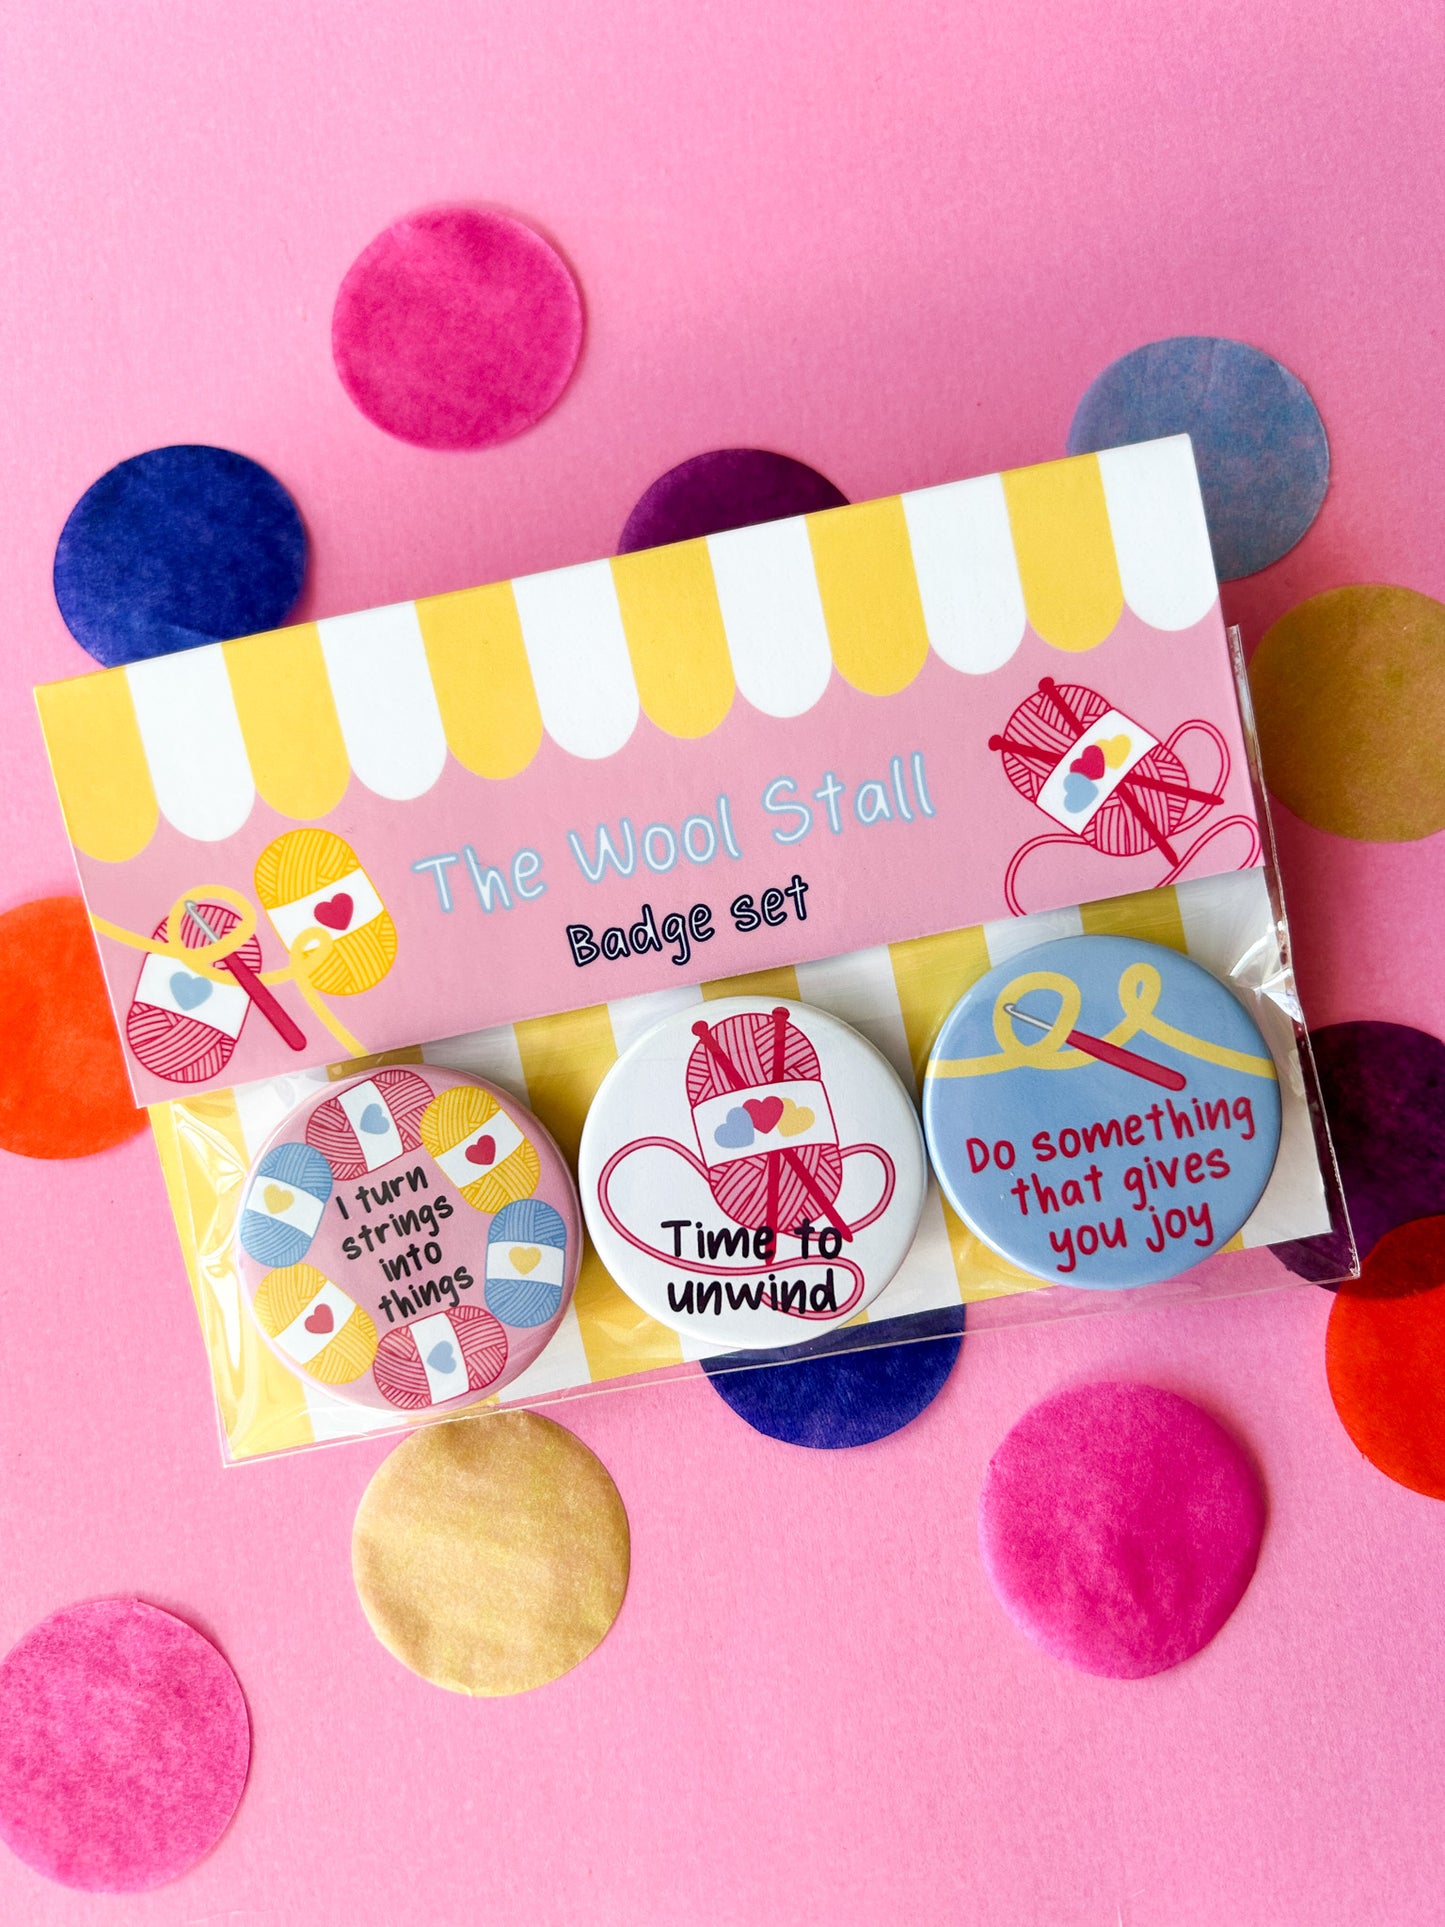 The Wool Stall Affirmation Pin Badge Set